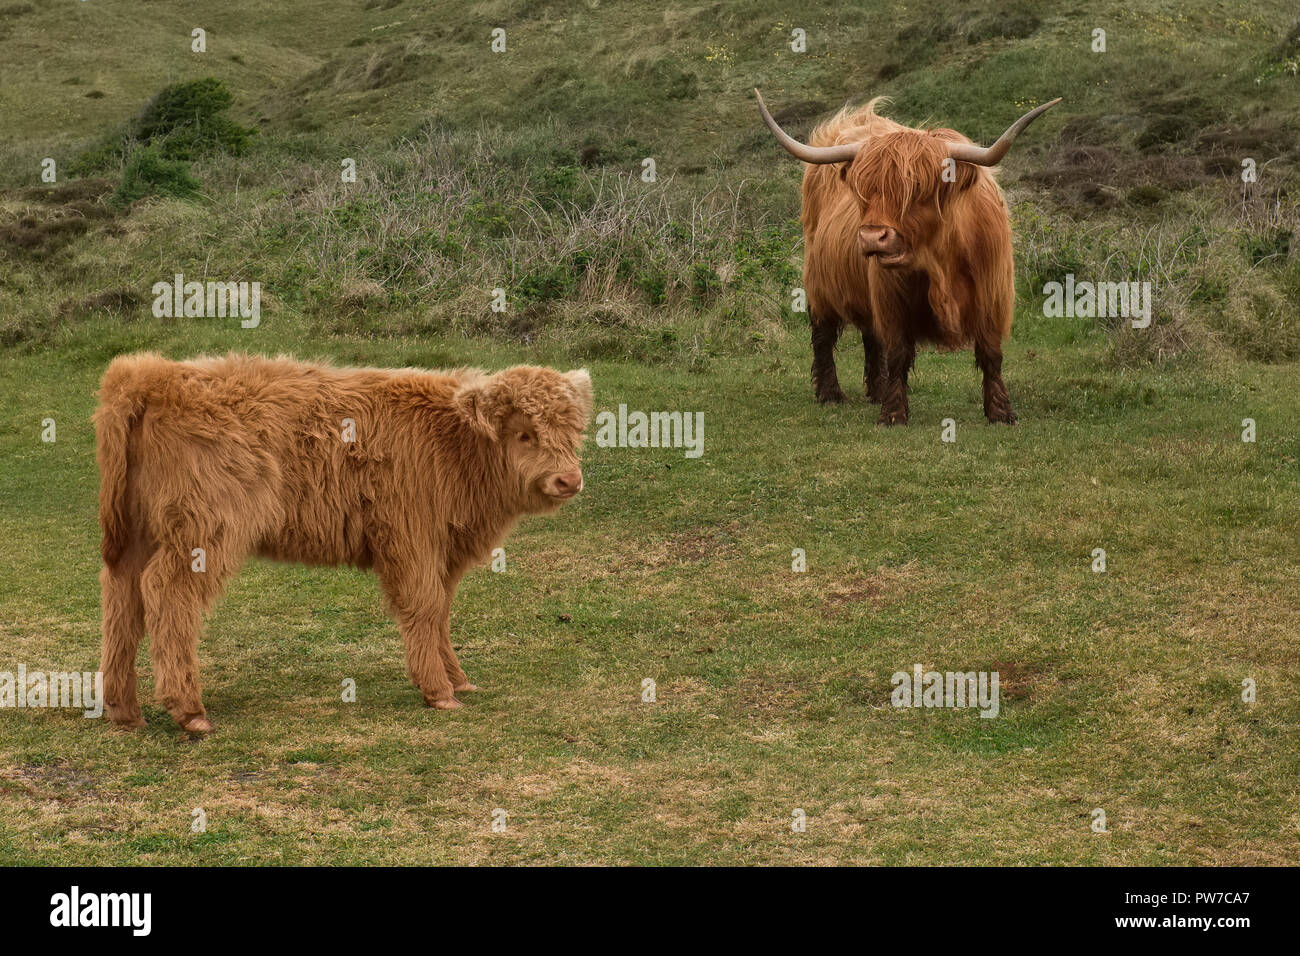 Illustration shows Scottish Highland cow and calf in the Dunes of Texel, the Netherlands. Stock Photo